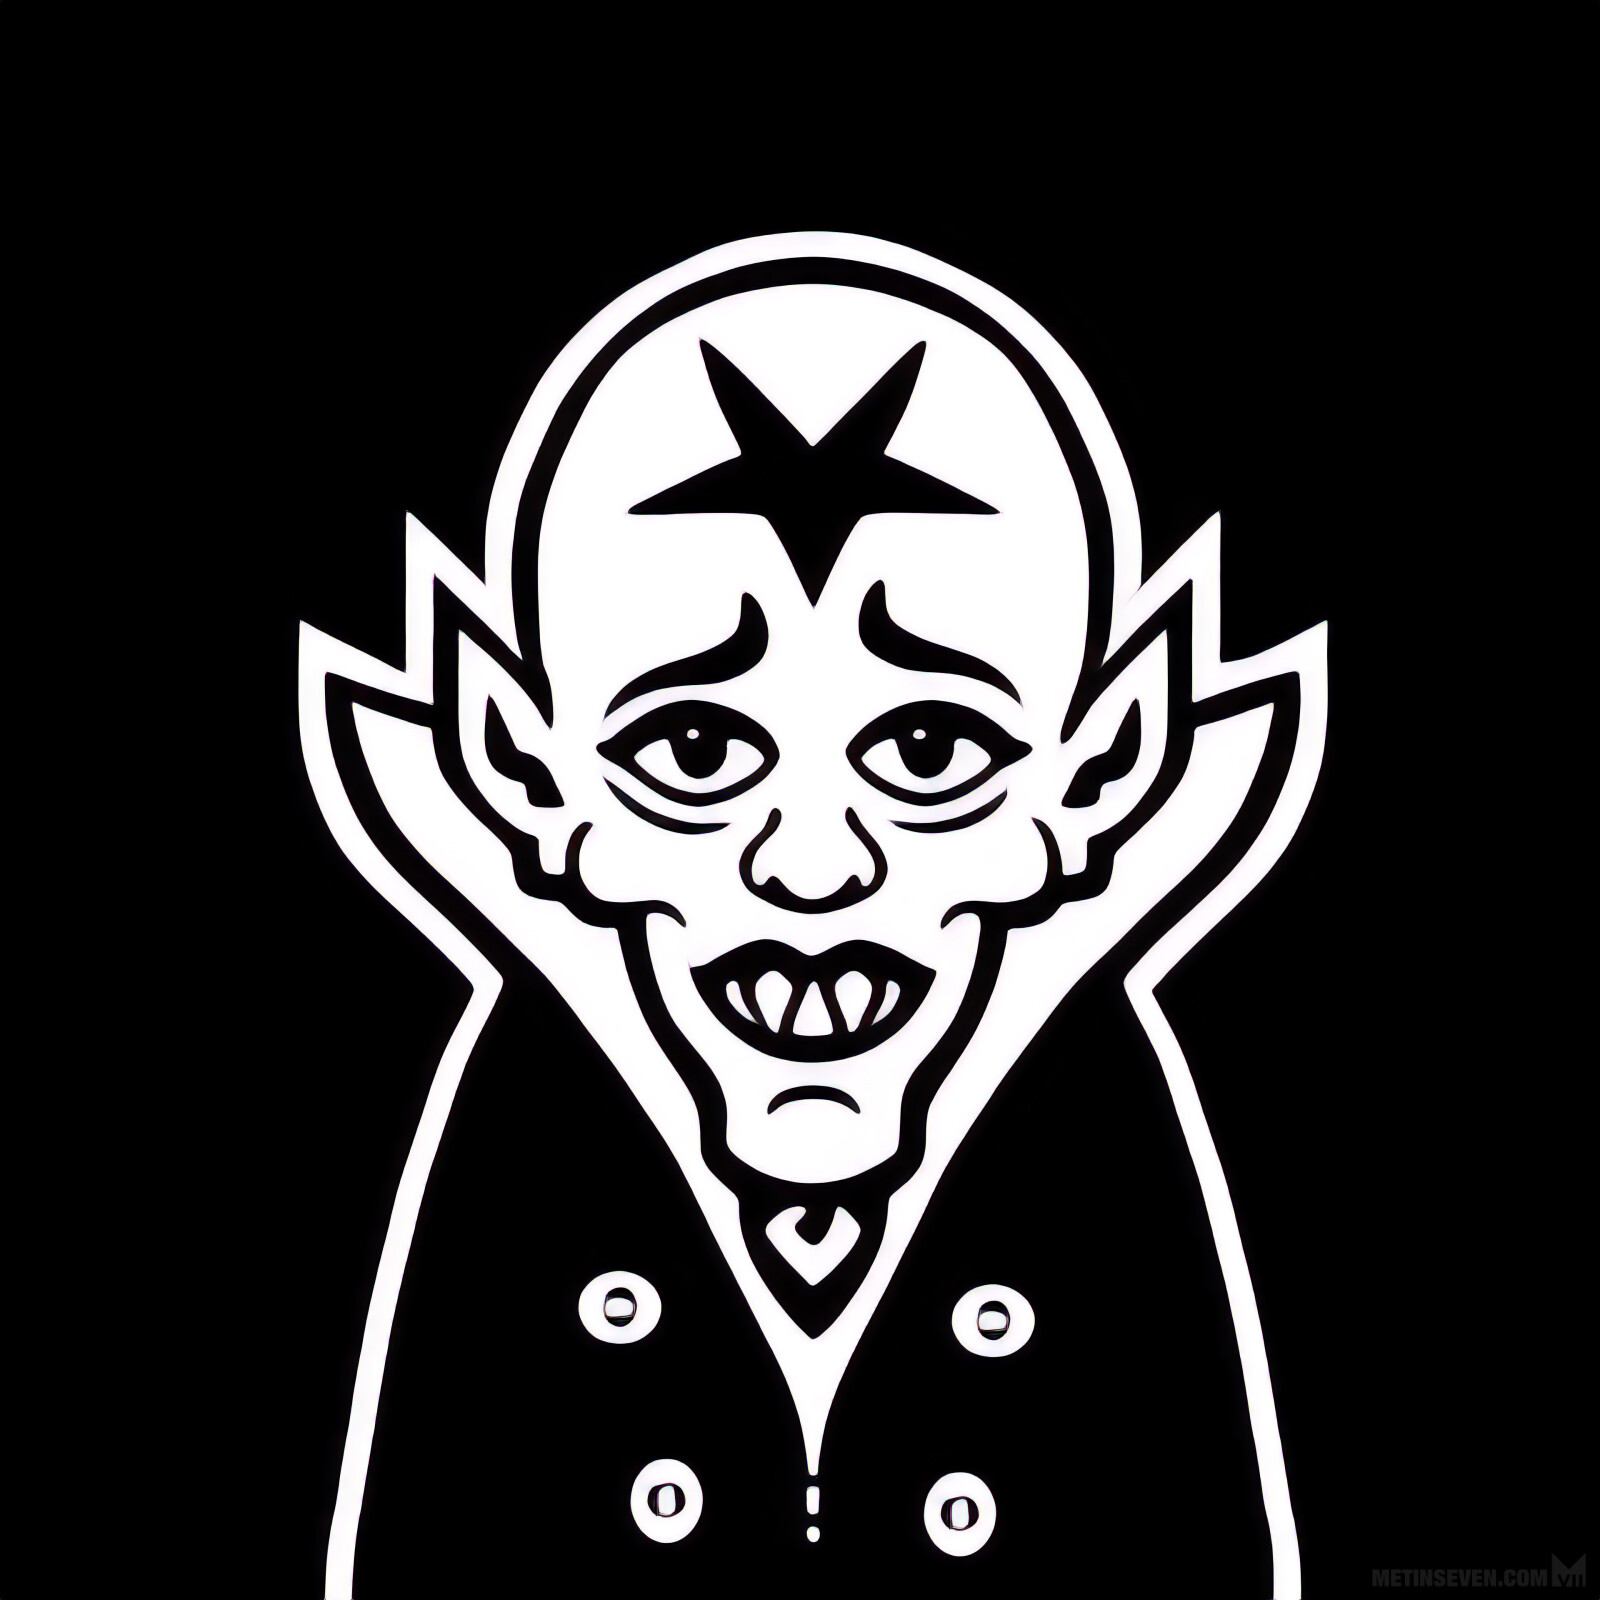 Young Nosferatu was still a bit insecure about his prominent pentagram tattoo.